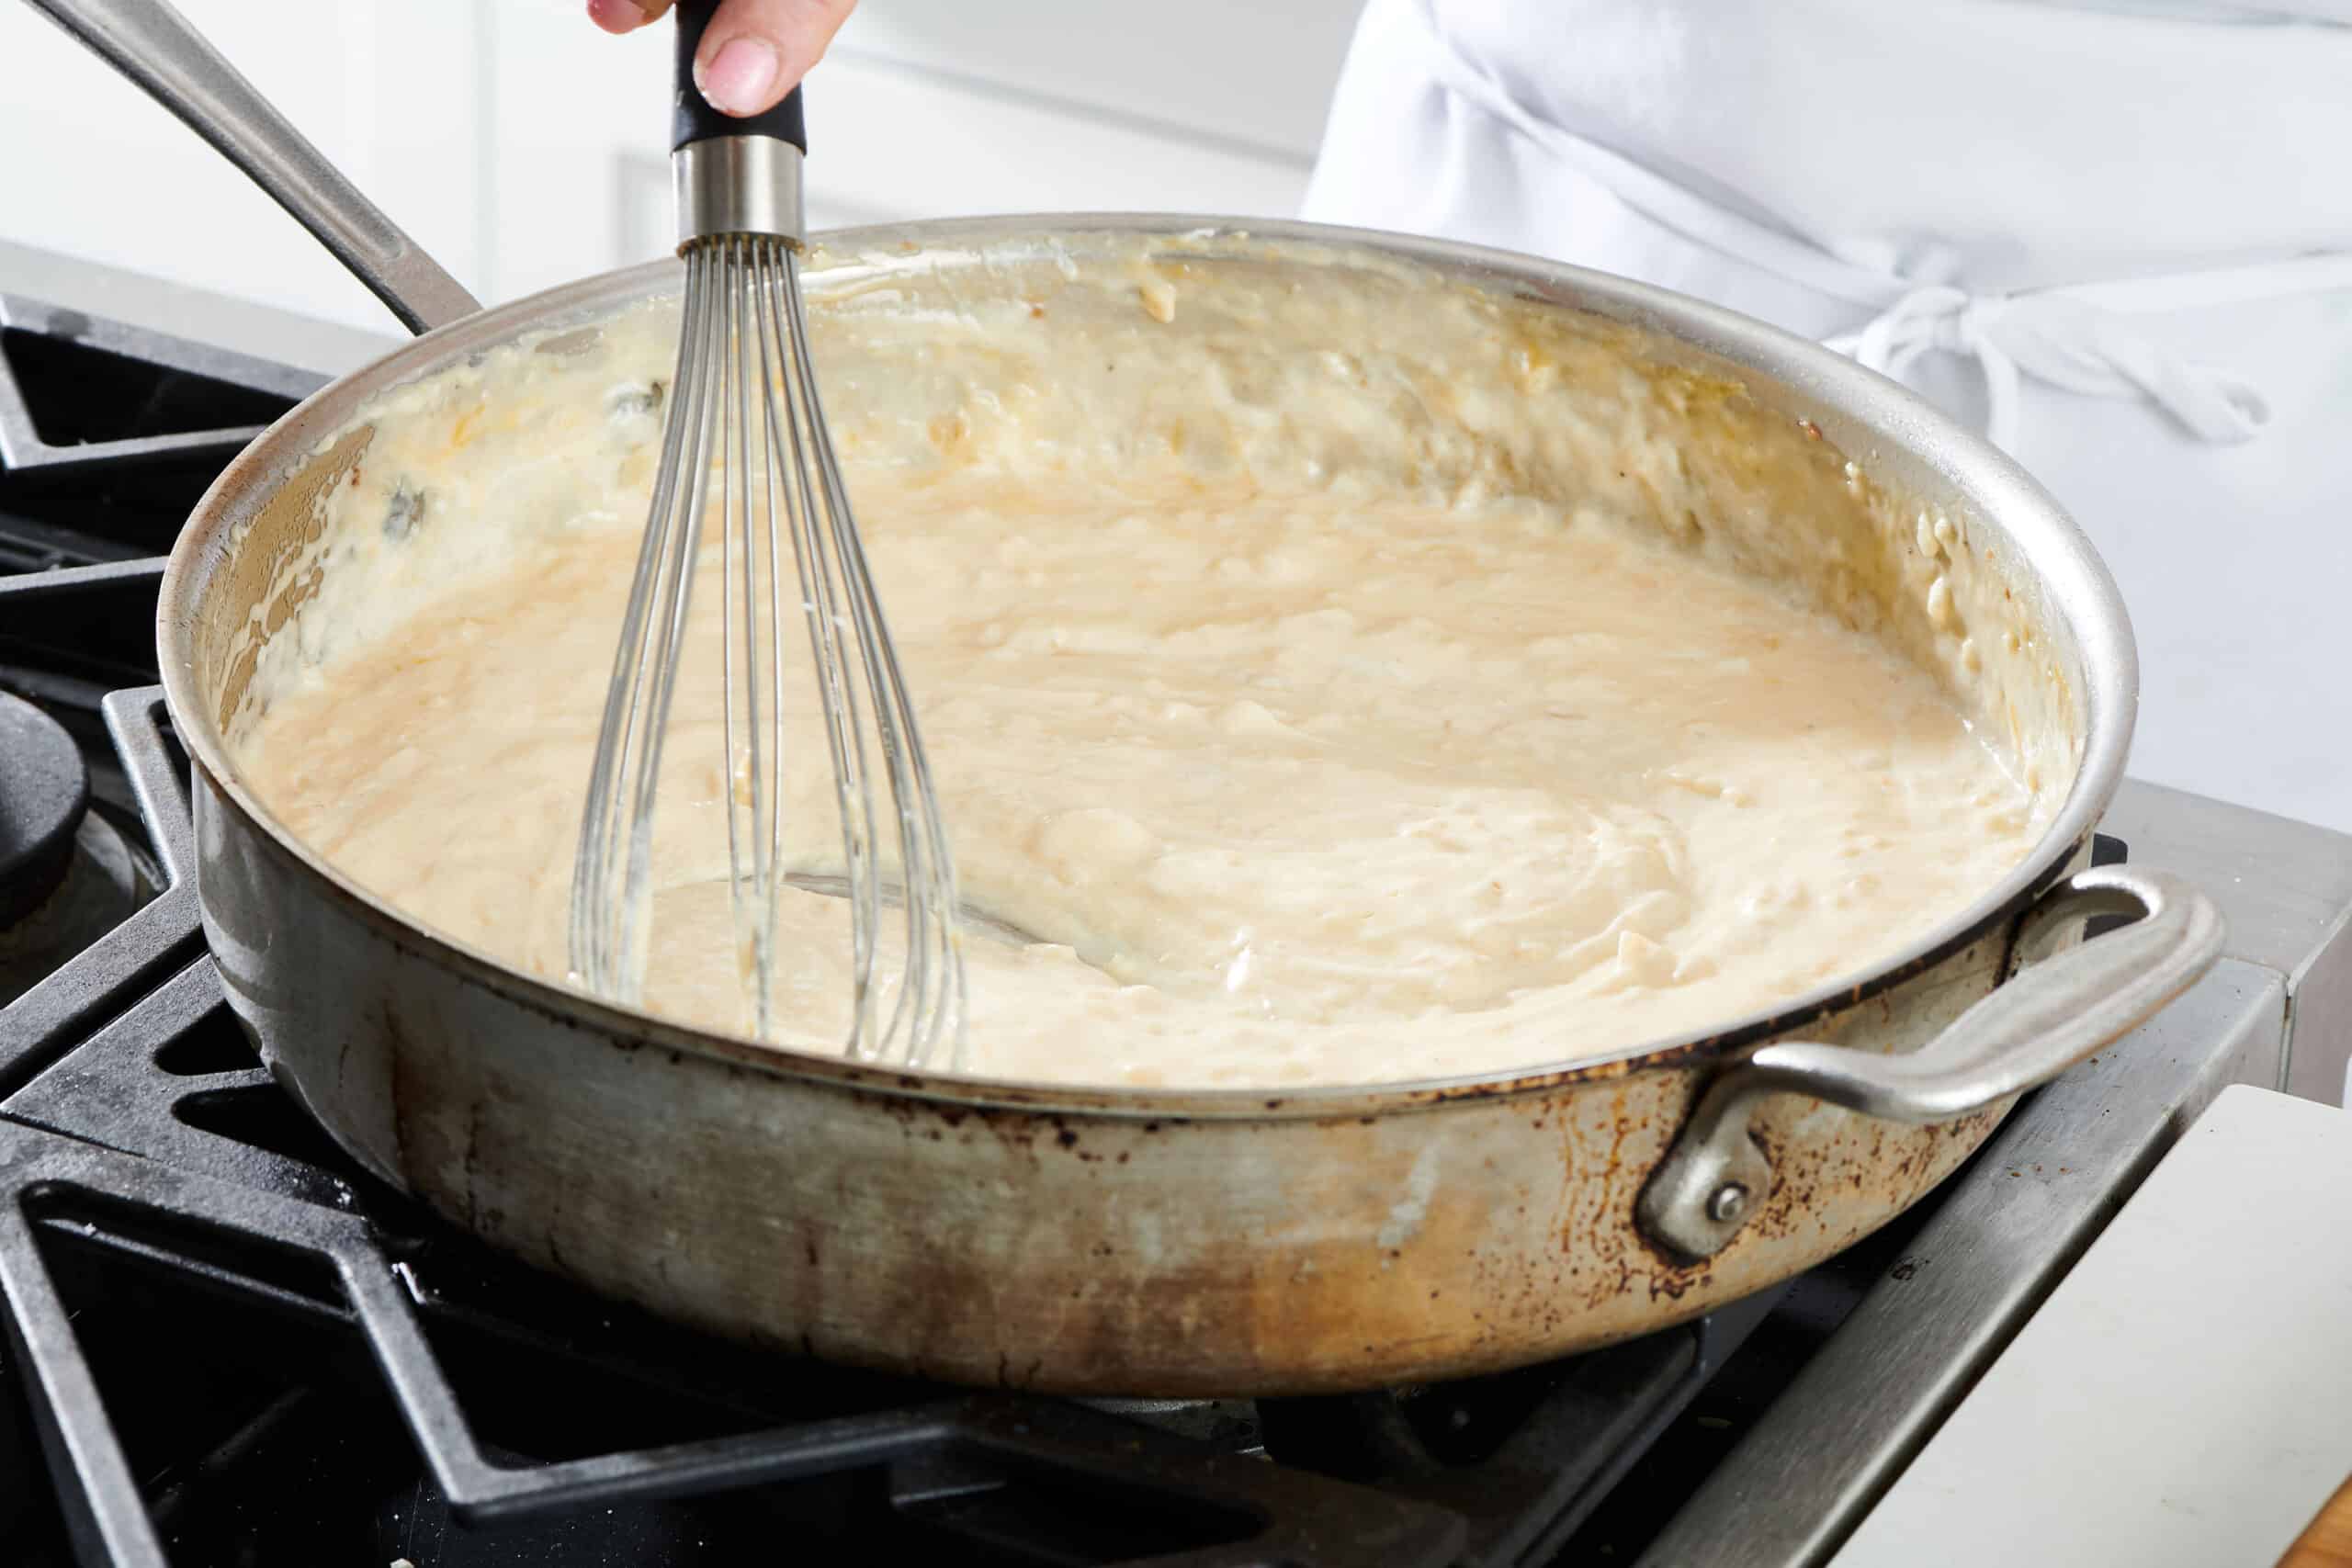 Flour and milk mixture being whisked in a skillet.